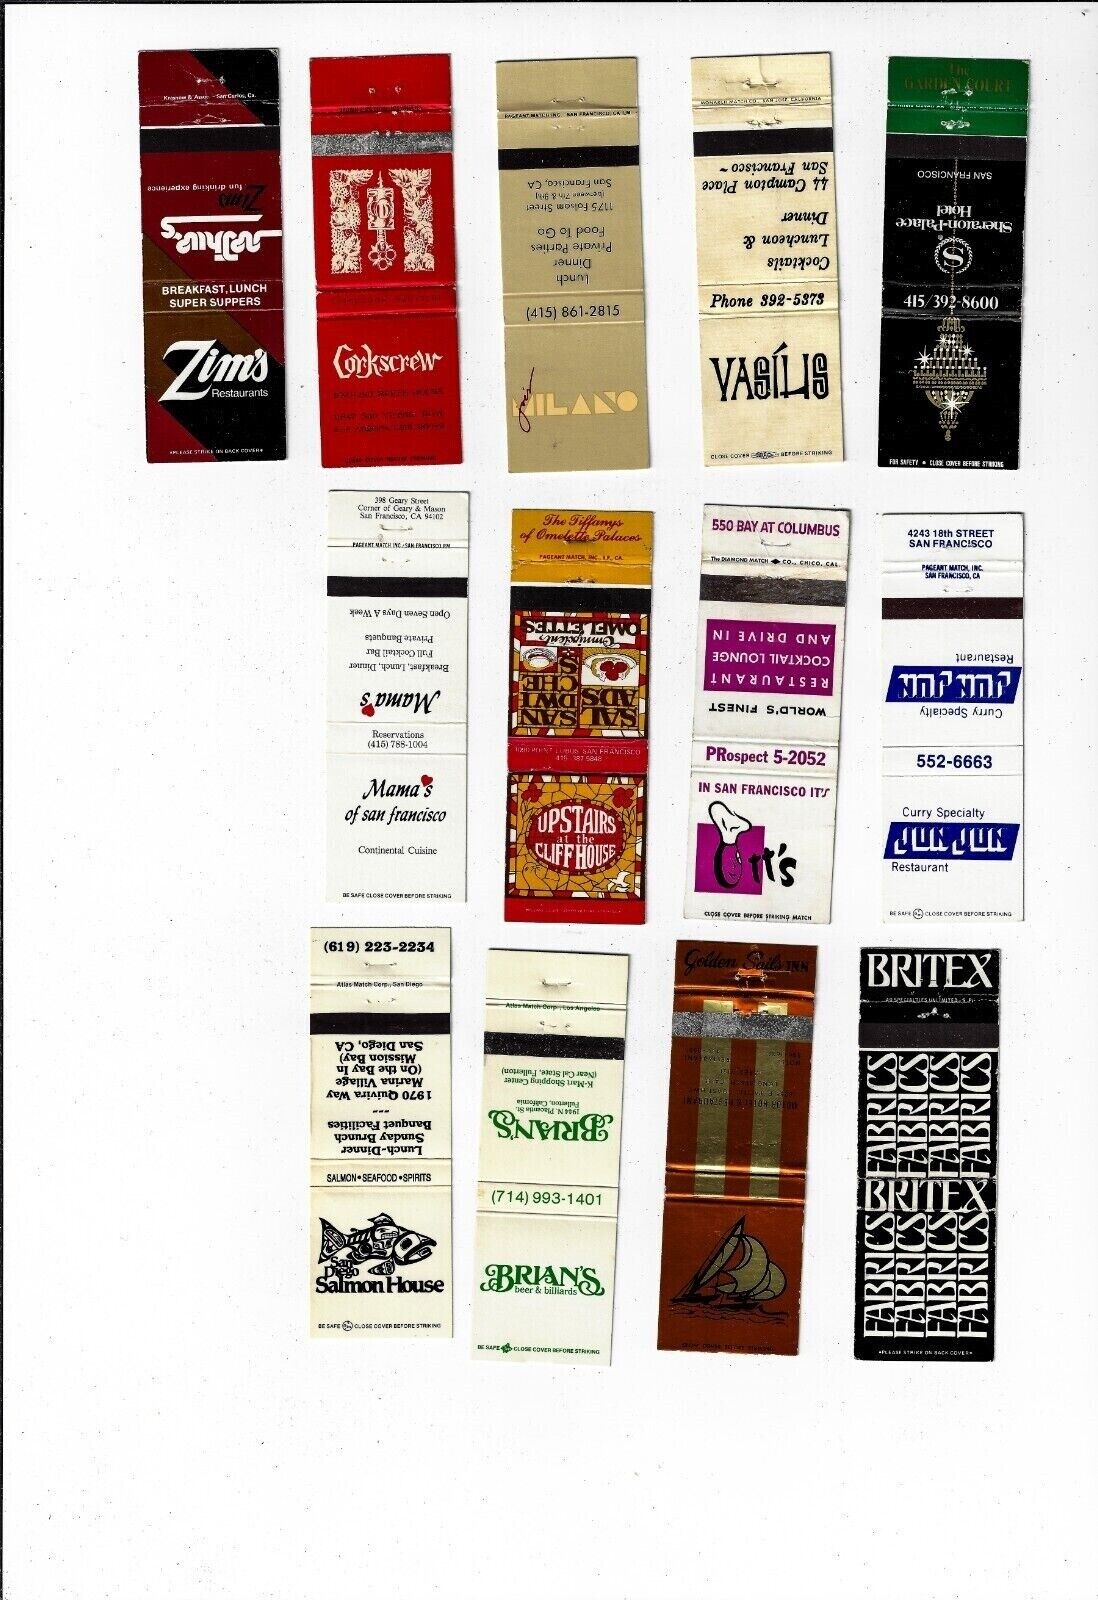 Less Than Perfect Lot 13 RS Matchbook covers Towns in California Motels Shops